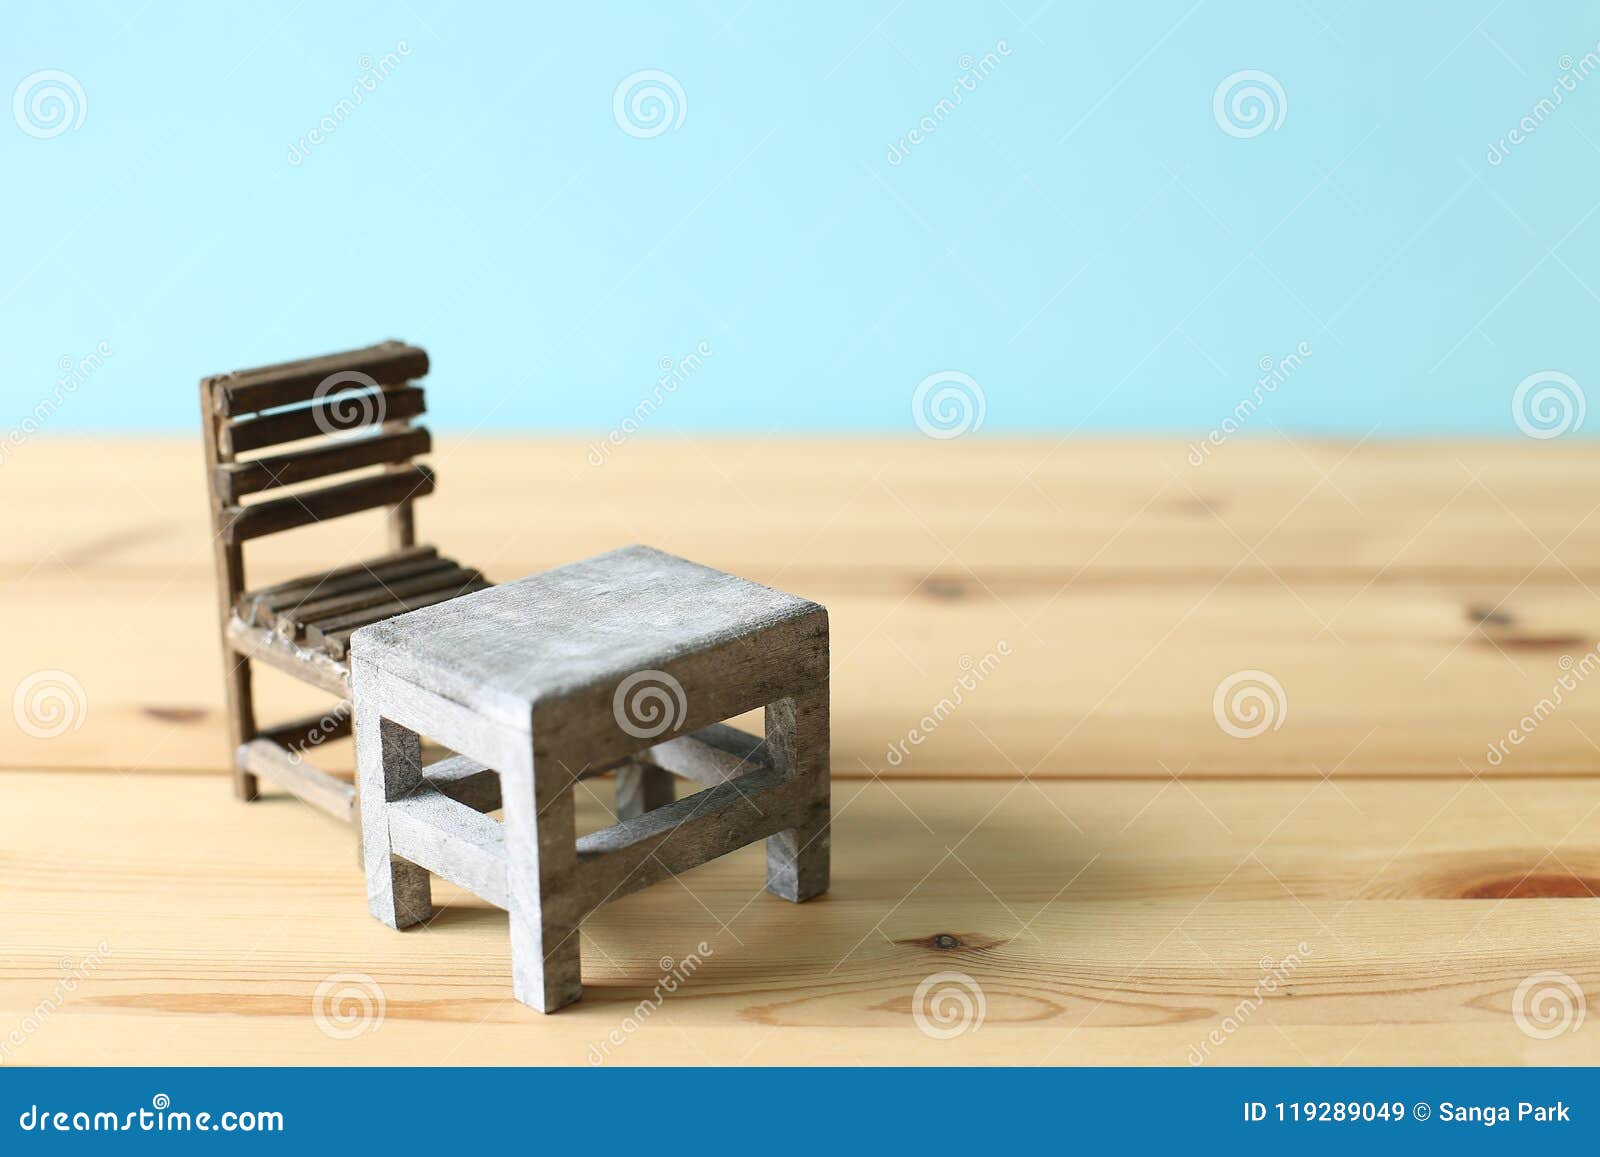 Old School Desk And Chair Stock Image Image Of Desktop 119289049